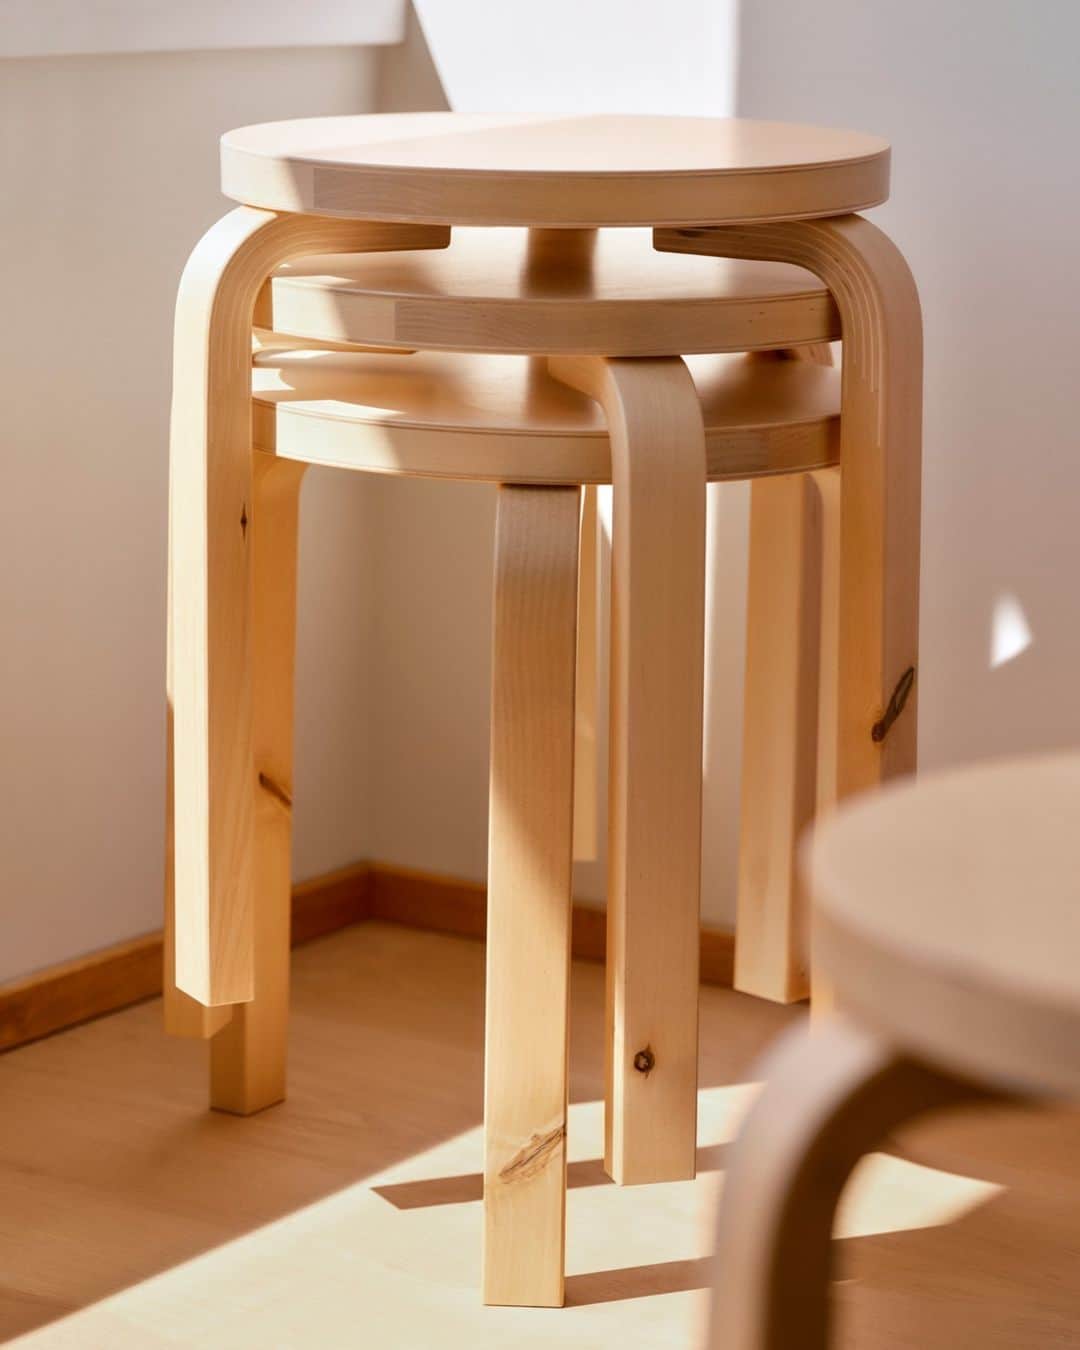 Artekのインスタグラム：「Stool 60 Villi, in collaboration with Formafantasma⁠ ⁠ Artek’s new wood selection “wild birch” is used for the first time in celebration of the 90th anniversary of Stool 60.⁠ Stool 60 Villi – meaning “wild” in Finnish – is made of birch that embraces the honest beauty and variety of the forest, including knots, insect trails and natural colour fluctuations. ⁠ ⁠ A further four extremely limited variations of Stool 60 Villi –  Bark, Core, Knot and Trail – were developed, each to highlight one of these forest-centric features. Each stool includes a coded classification system of different metal studs and accompanying descriptive labels that, like product passports, identify the highlighted feature and offer an educative layer of information. ⁠ ⁠ Shop Stool 60 Villi and our very few pieces of the Stool 60 Villi editions at Artek Helsinki, Artek Tokyo and shop.artek.fi.」